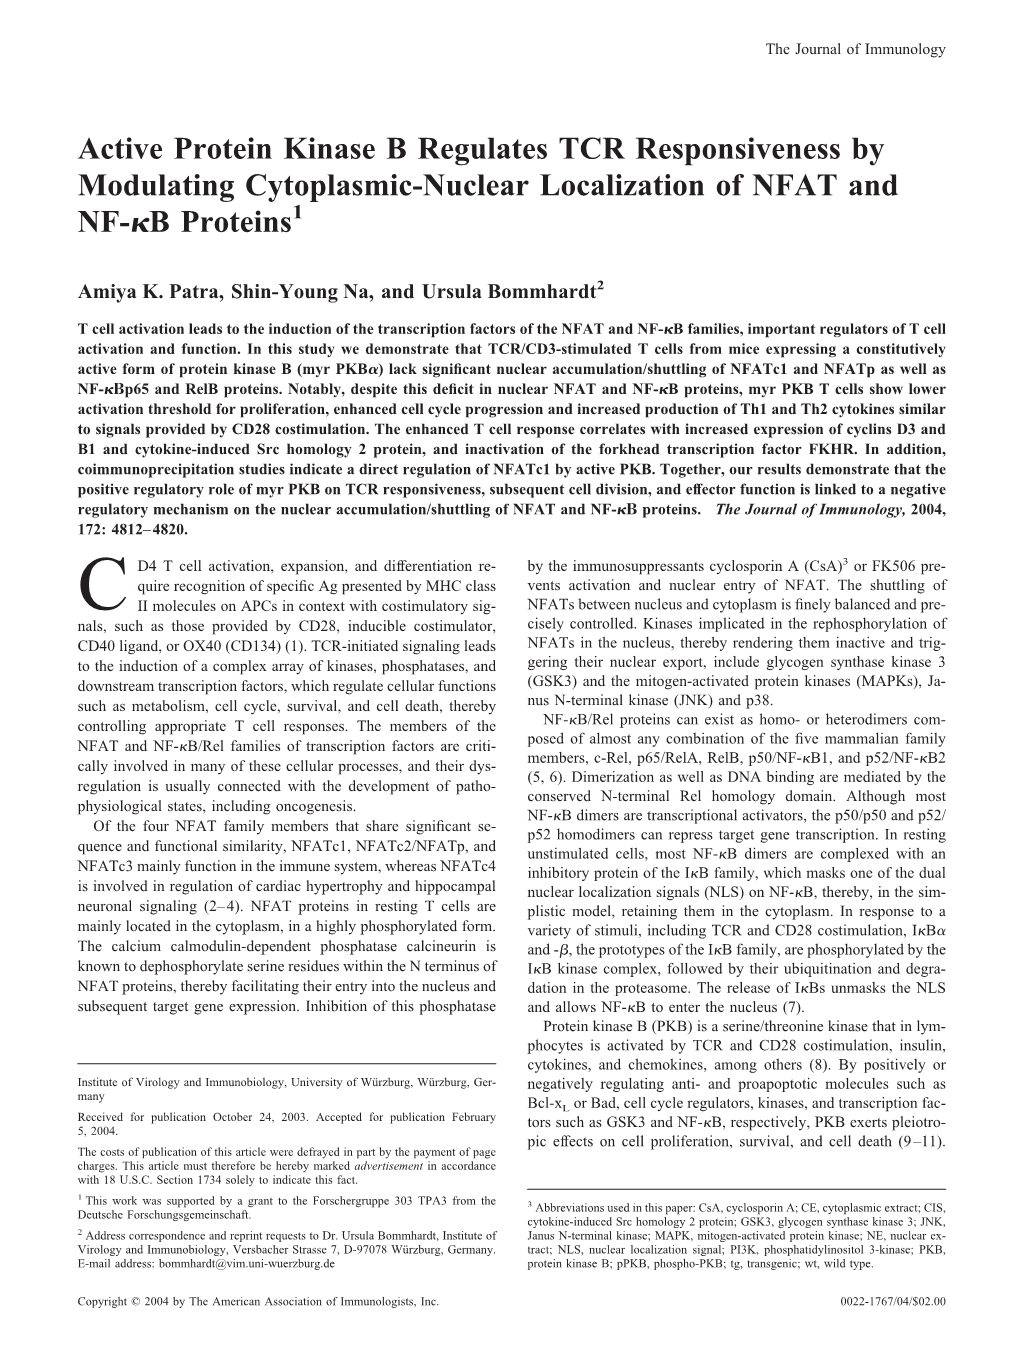 Cytoplasmic-Nuclear Localization of NFAT Responsiveness By